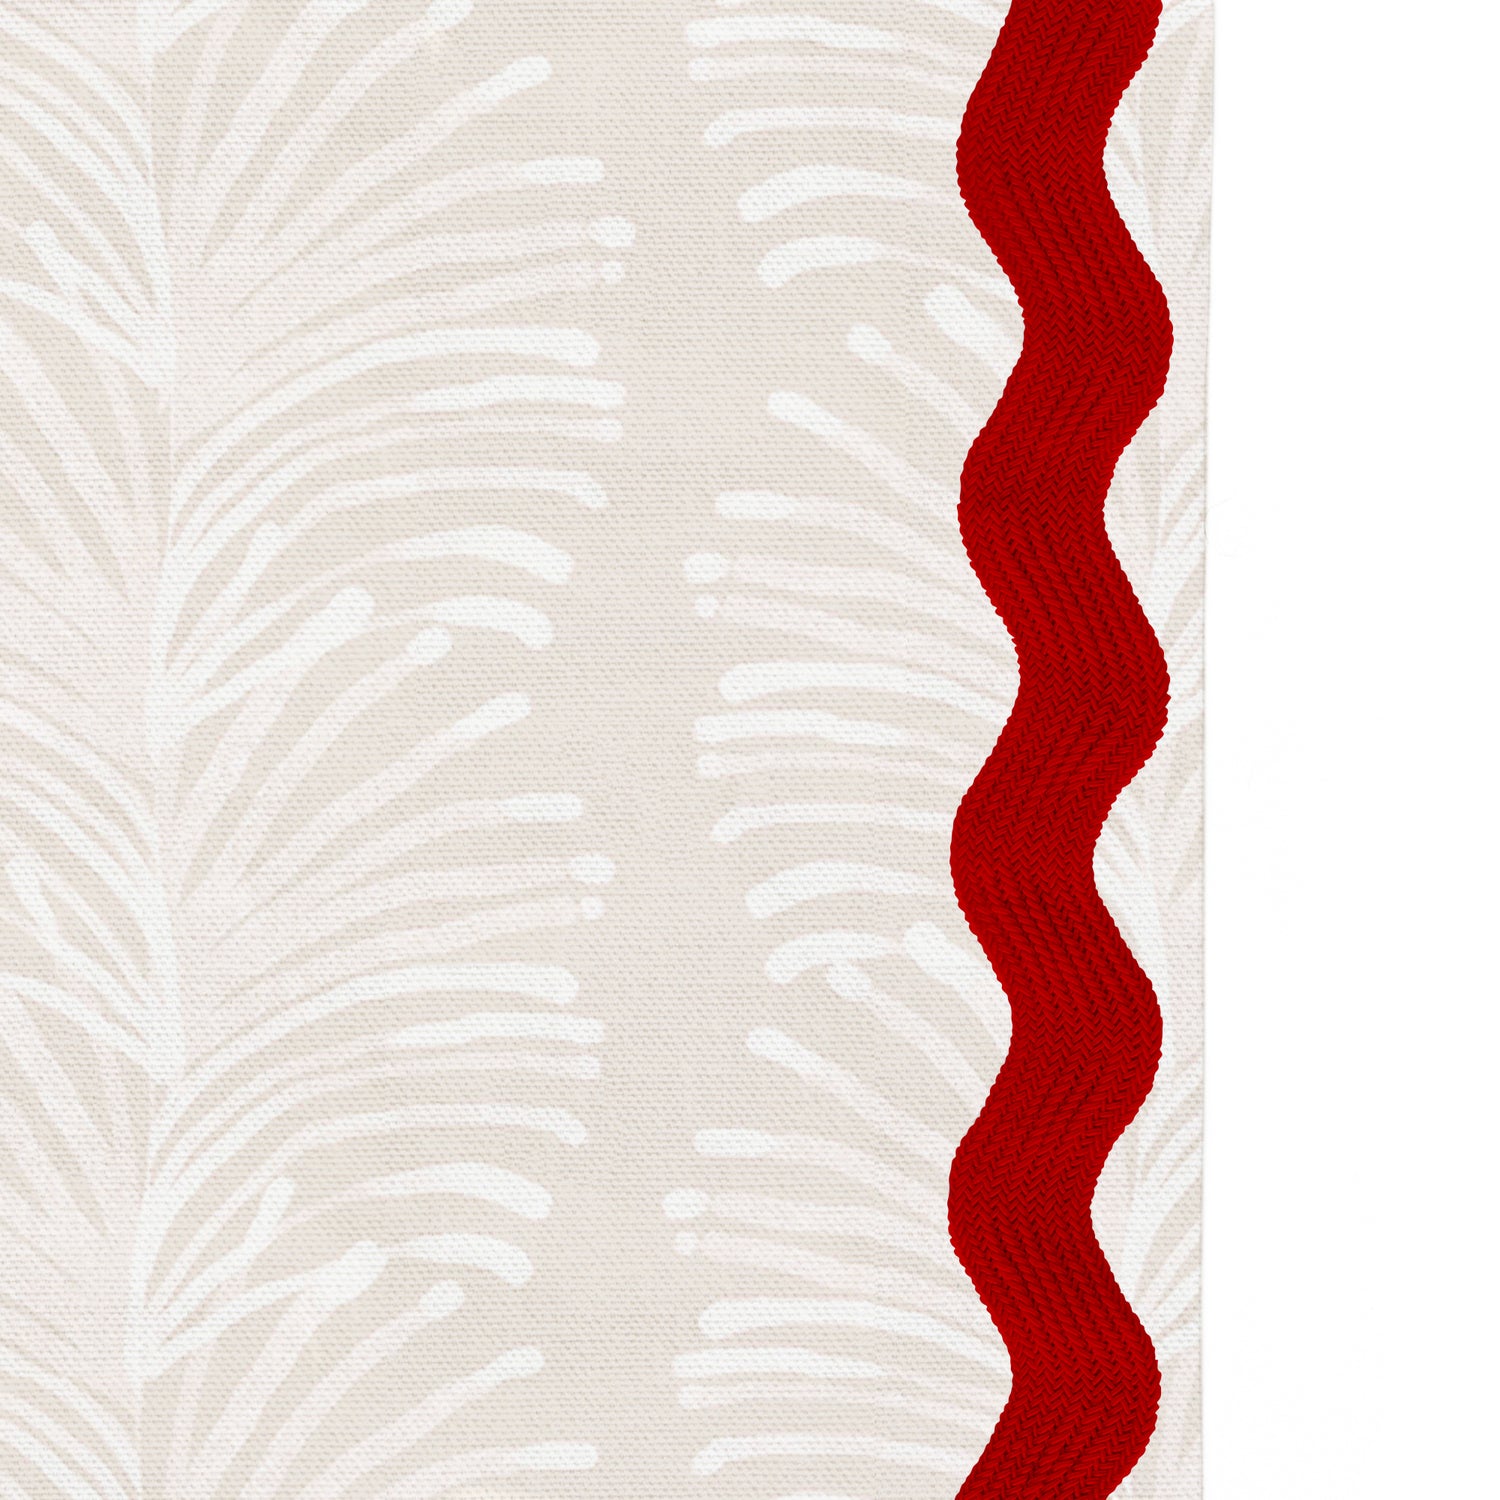 Upclose picture of Emma Sand custom Beige Botanical Stripecurtain with cherry rick rack trim